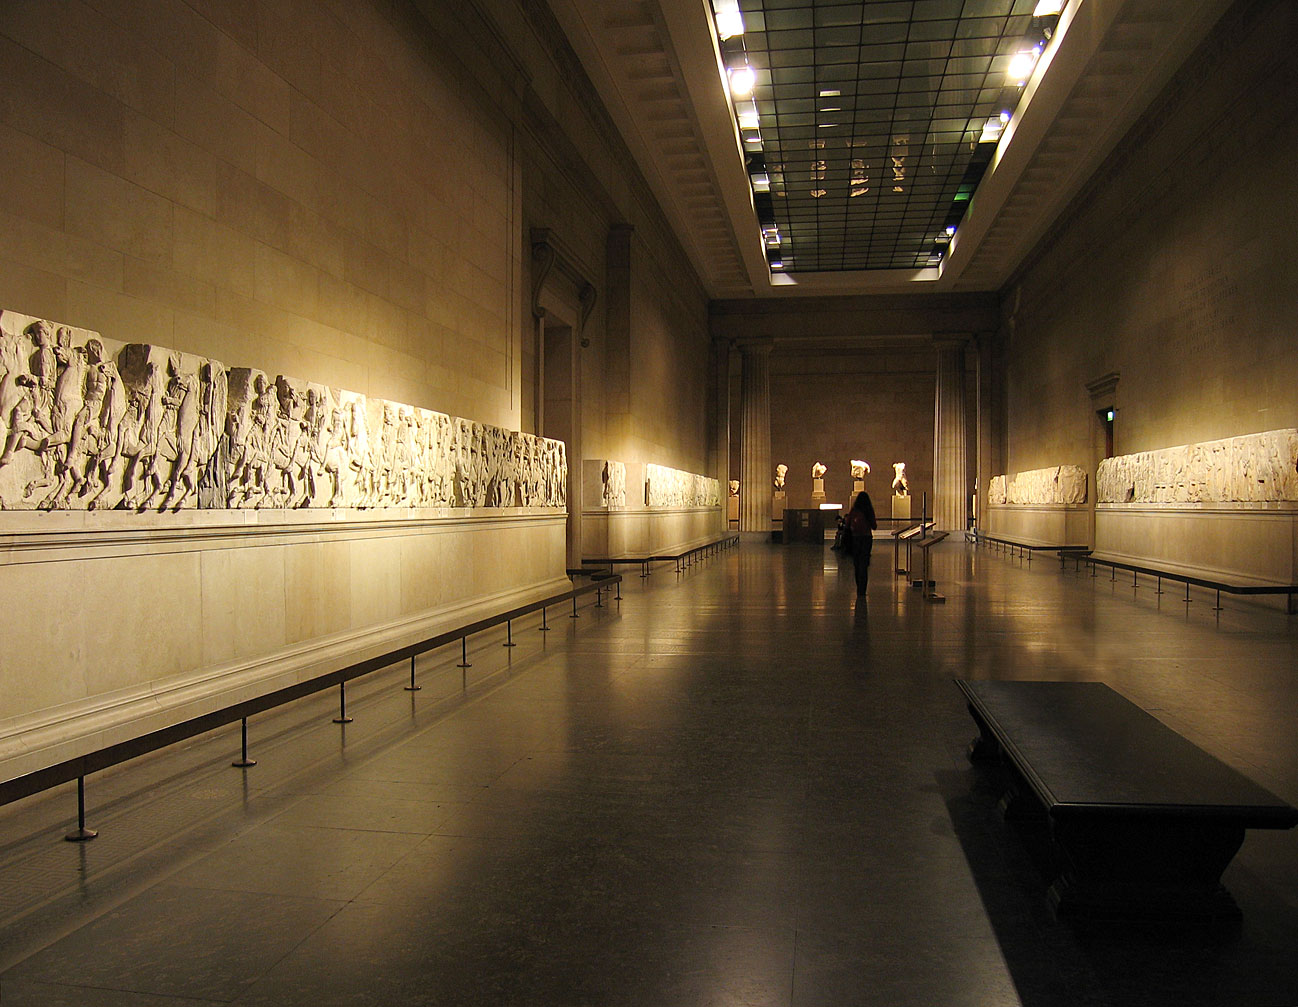 The gallery containing the Elgin Marbles in the British Museum.